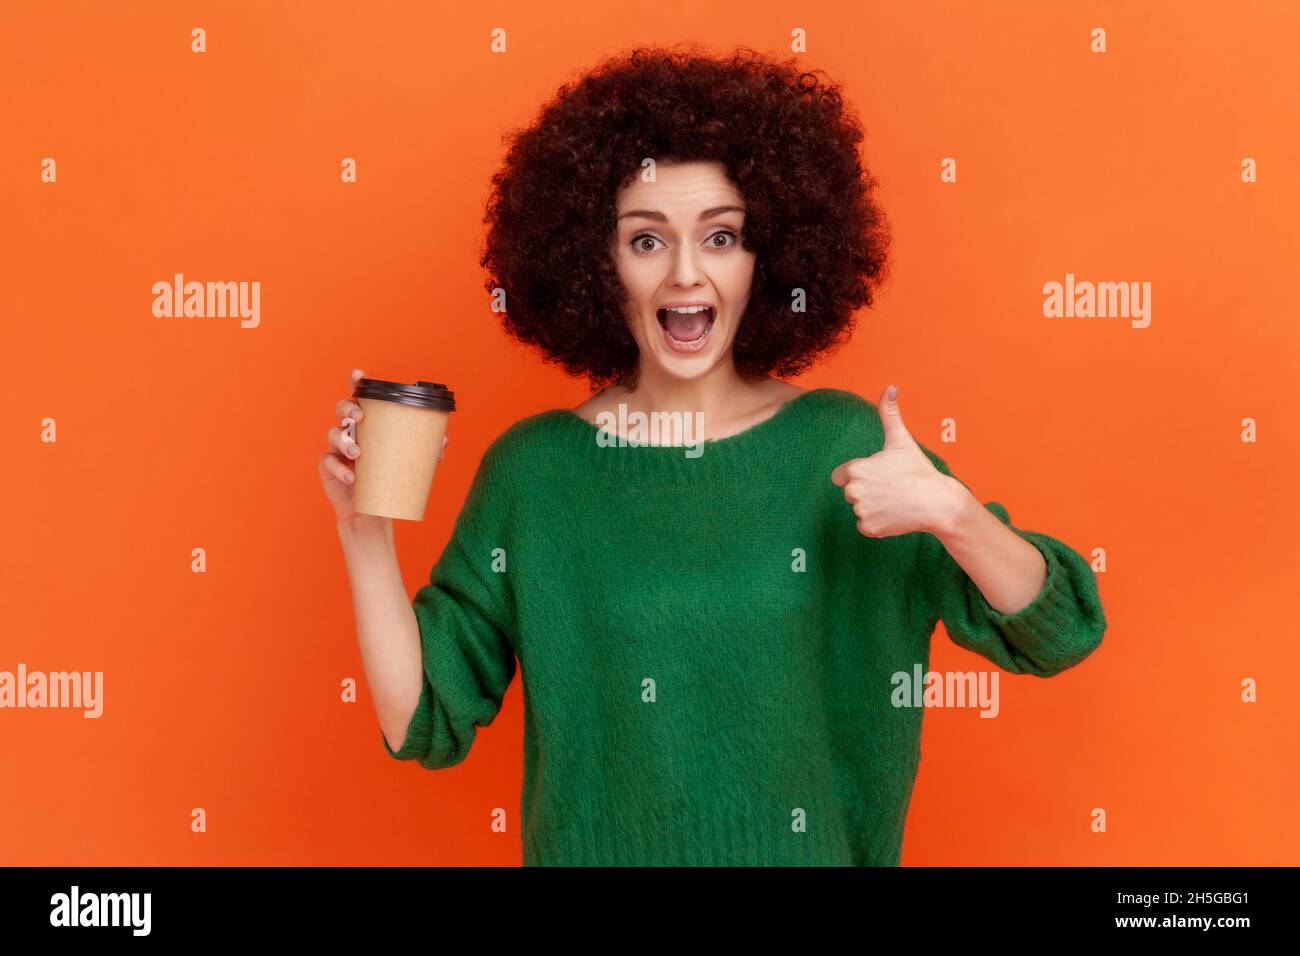 Excited woman with Afro hairstyle wearing green casual style sweater holding coffee to go and showing thumb up, recommend coffee house. Indoor studio shot isolated on orange background. Stock Photo